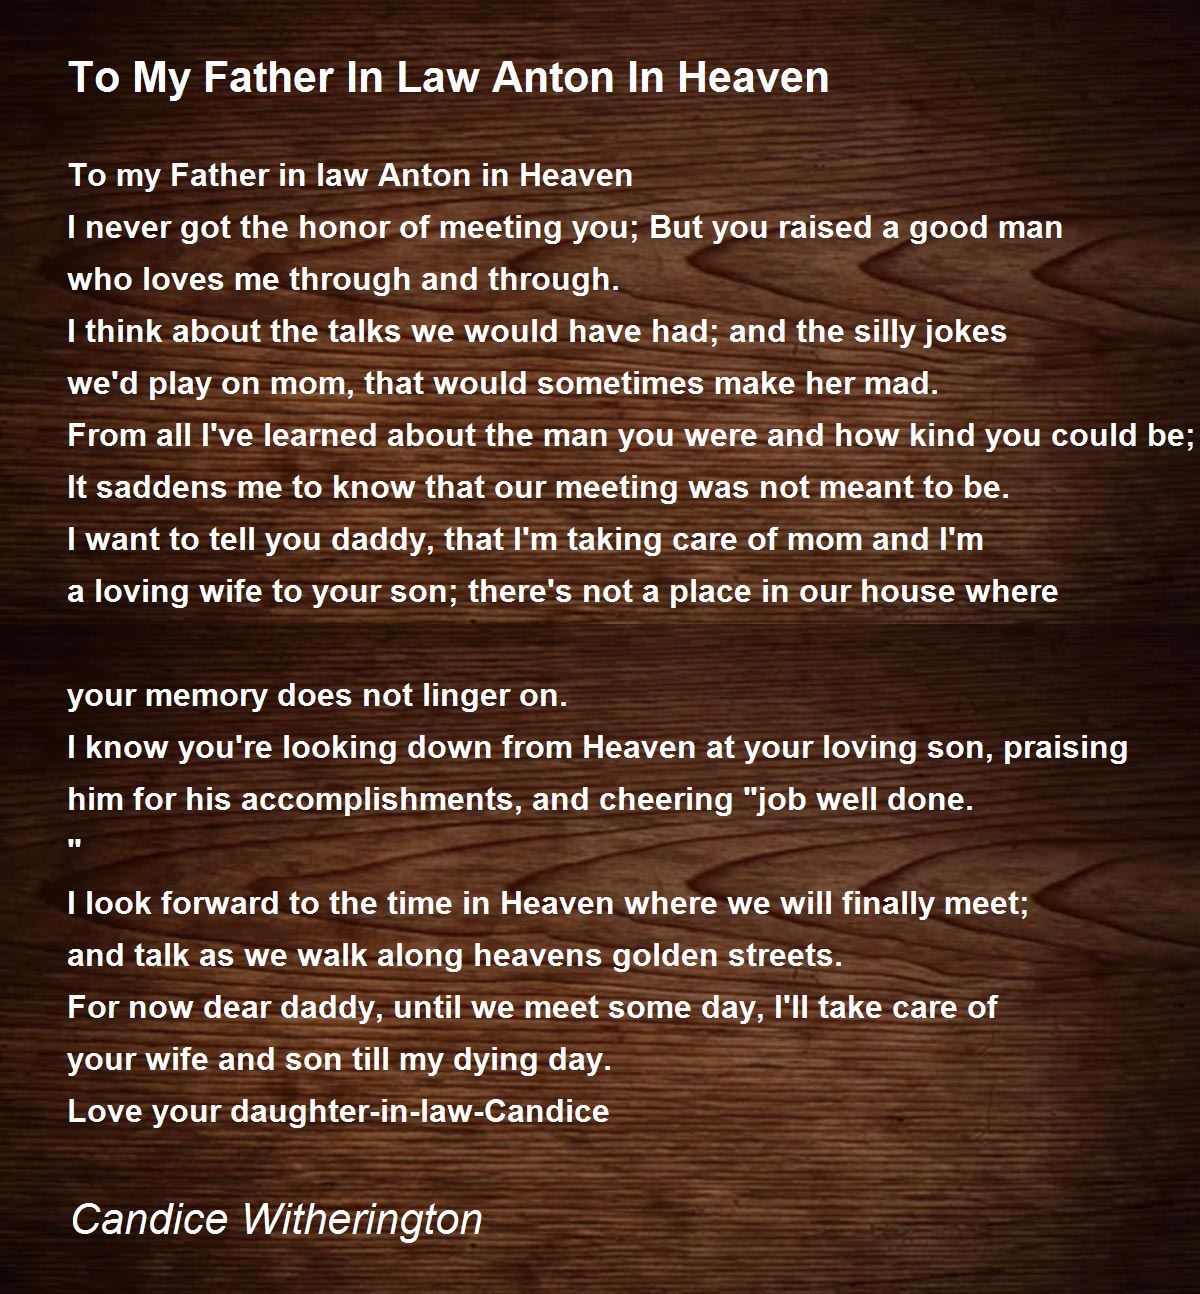 My Father In Law Anton Heaven Poem